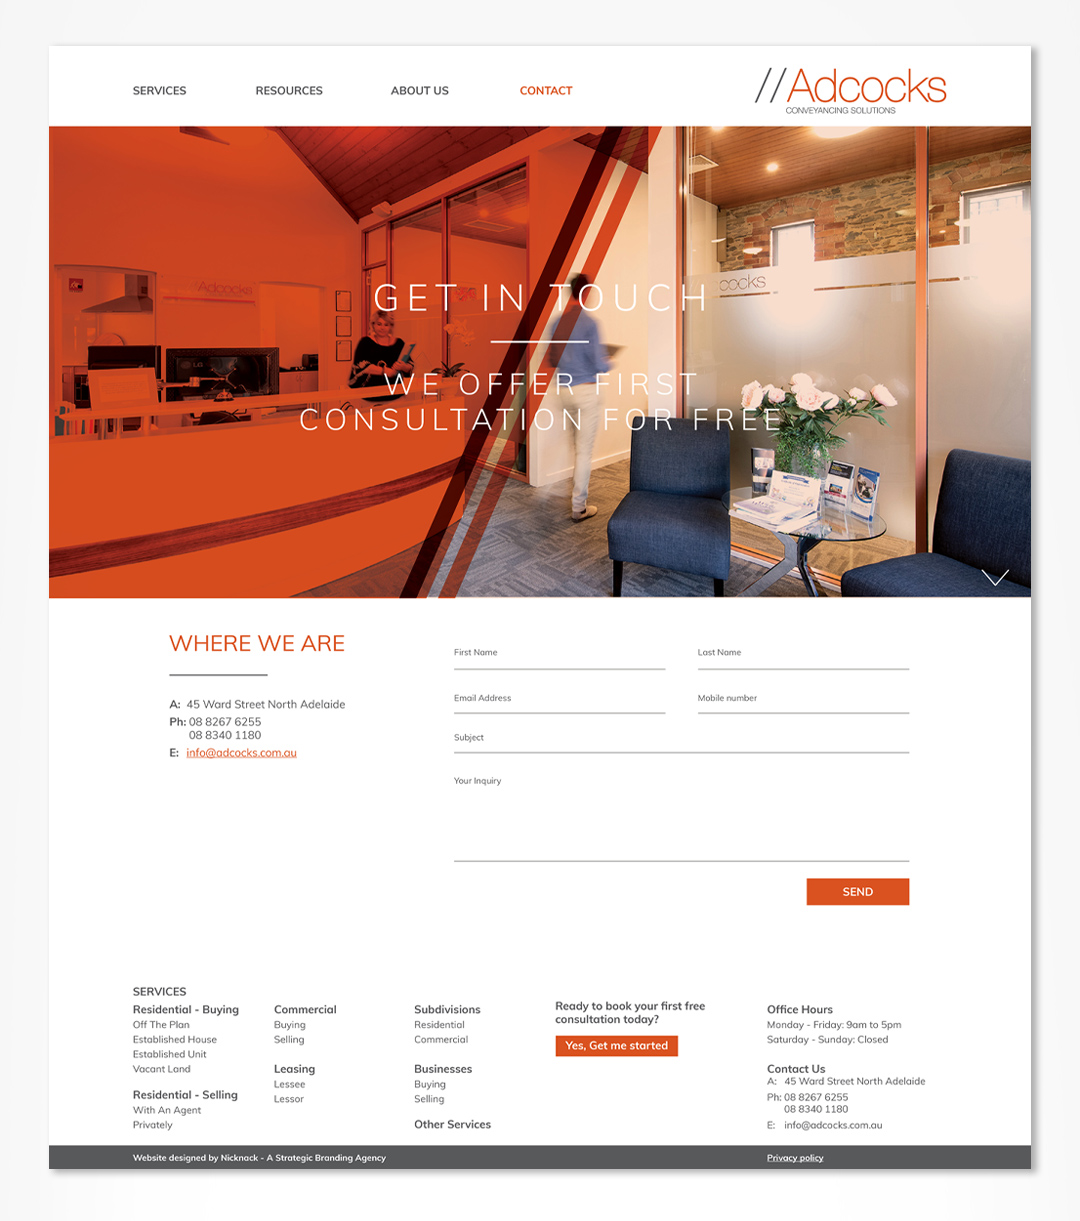 Adcocks Conveyancing Solutions website redesign, website wireframe and high fidelity prototype.